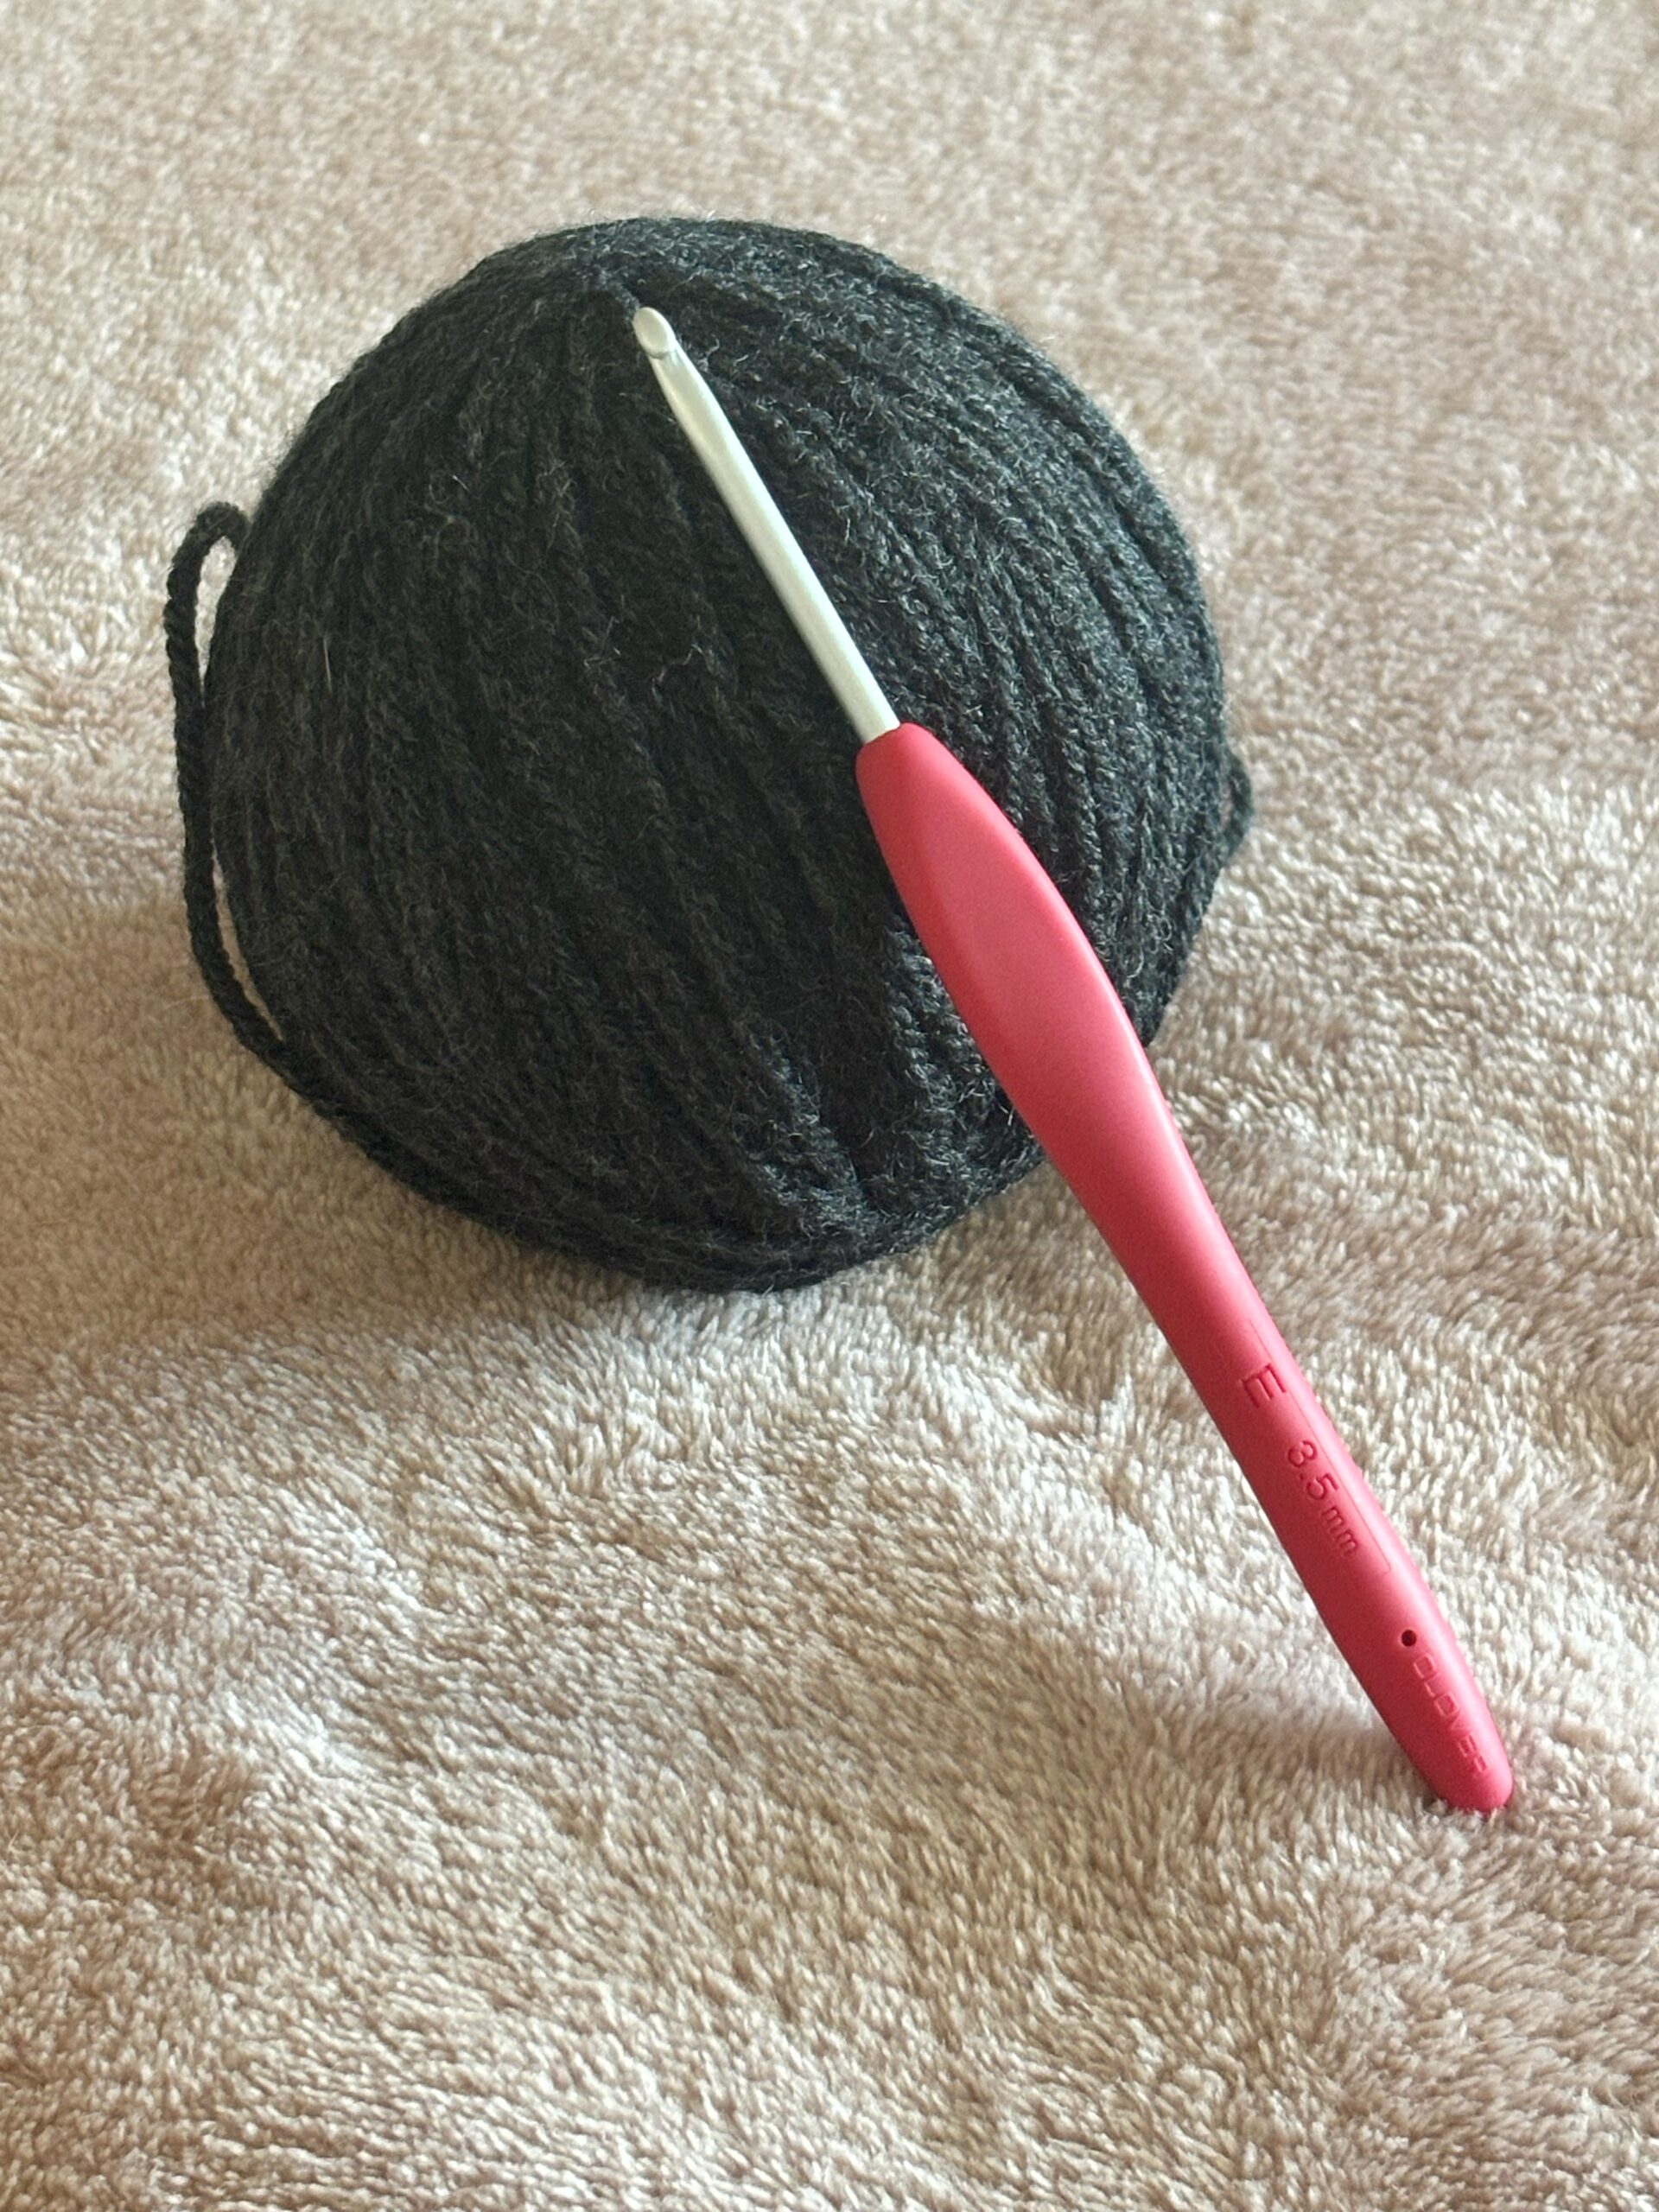 Yarn and hook for crocheting